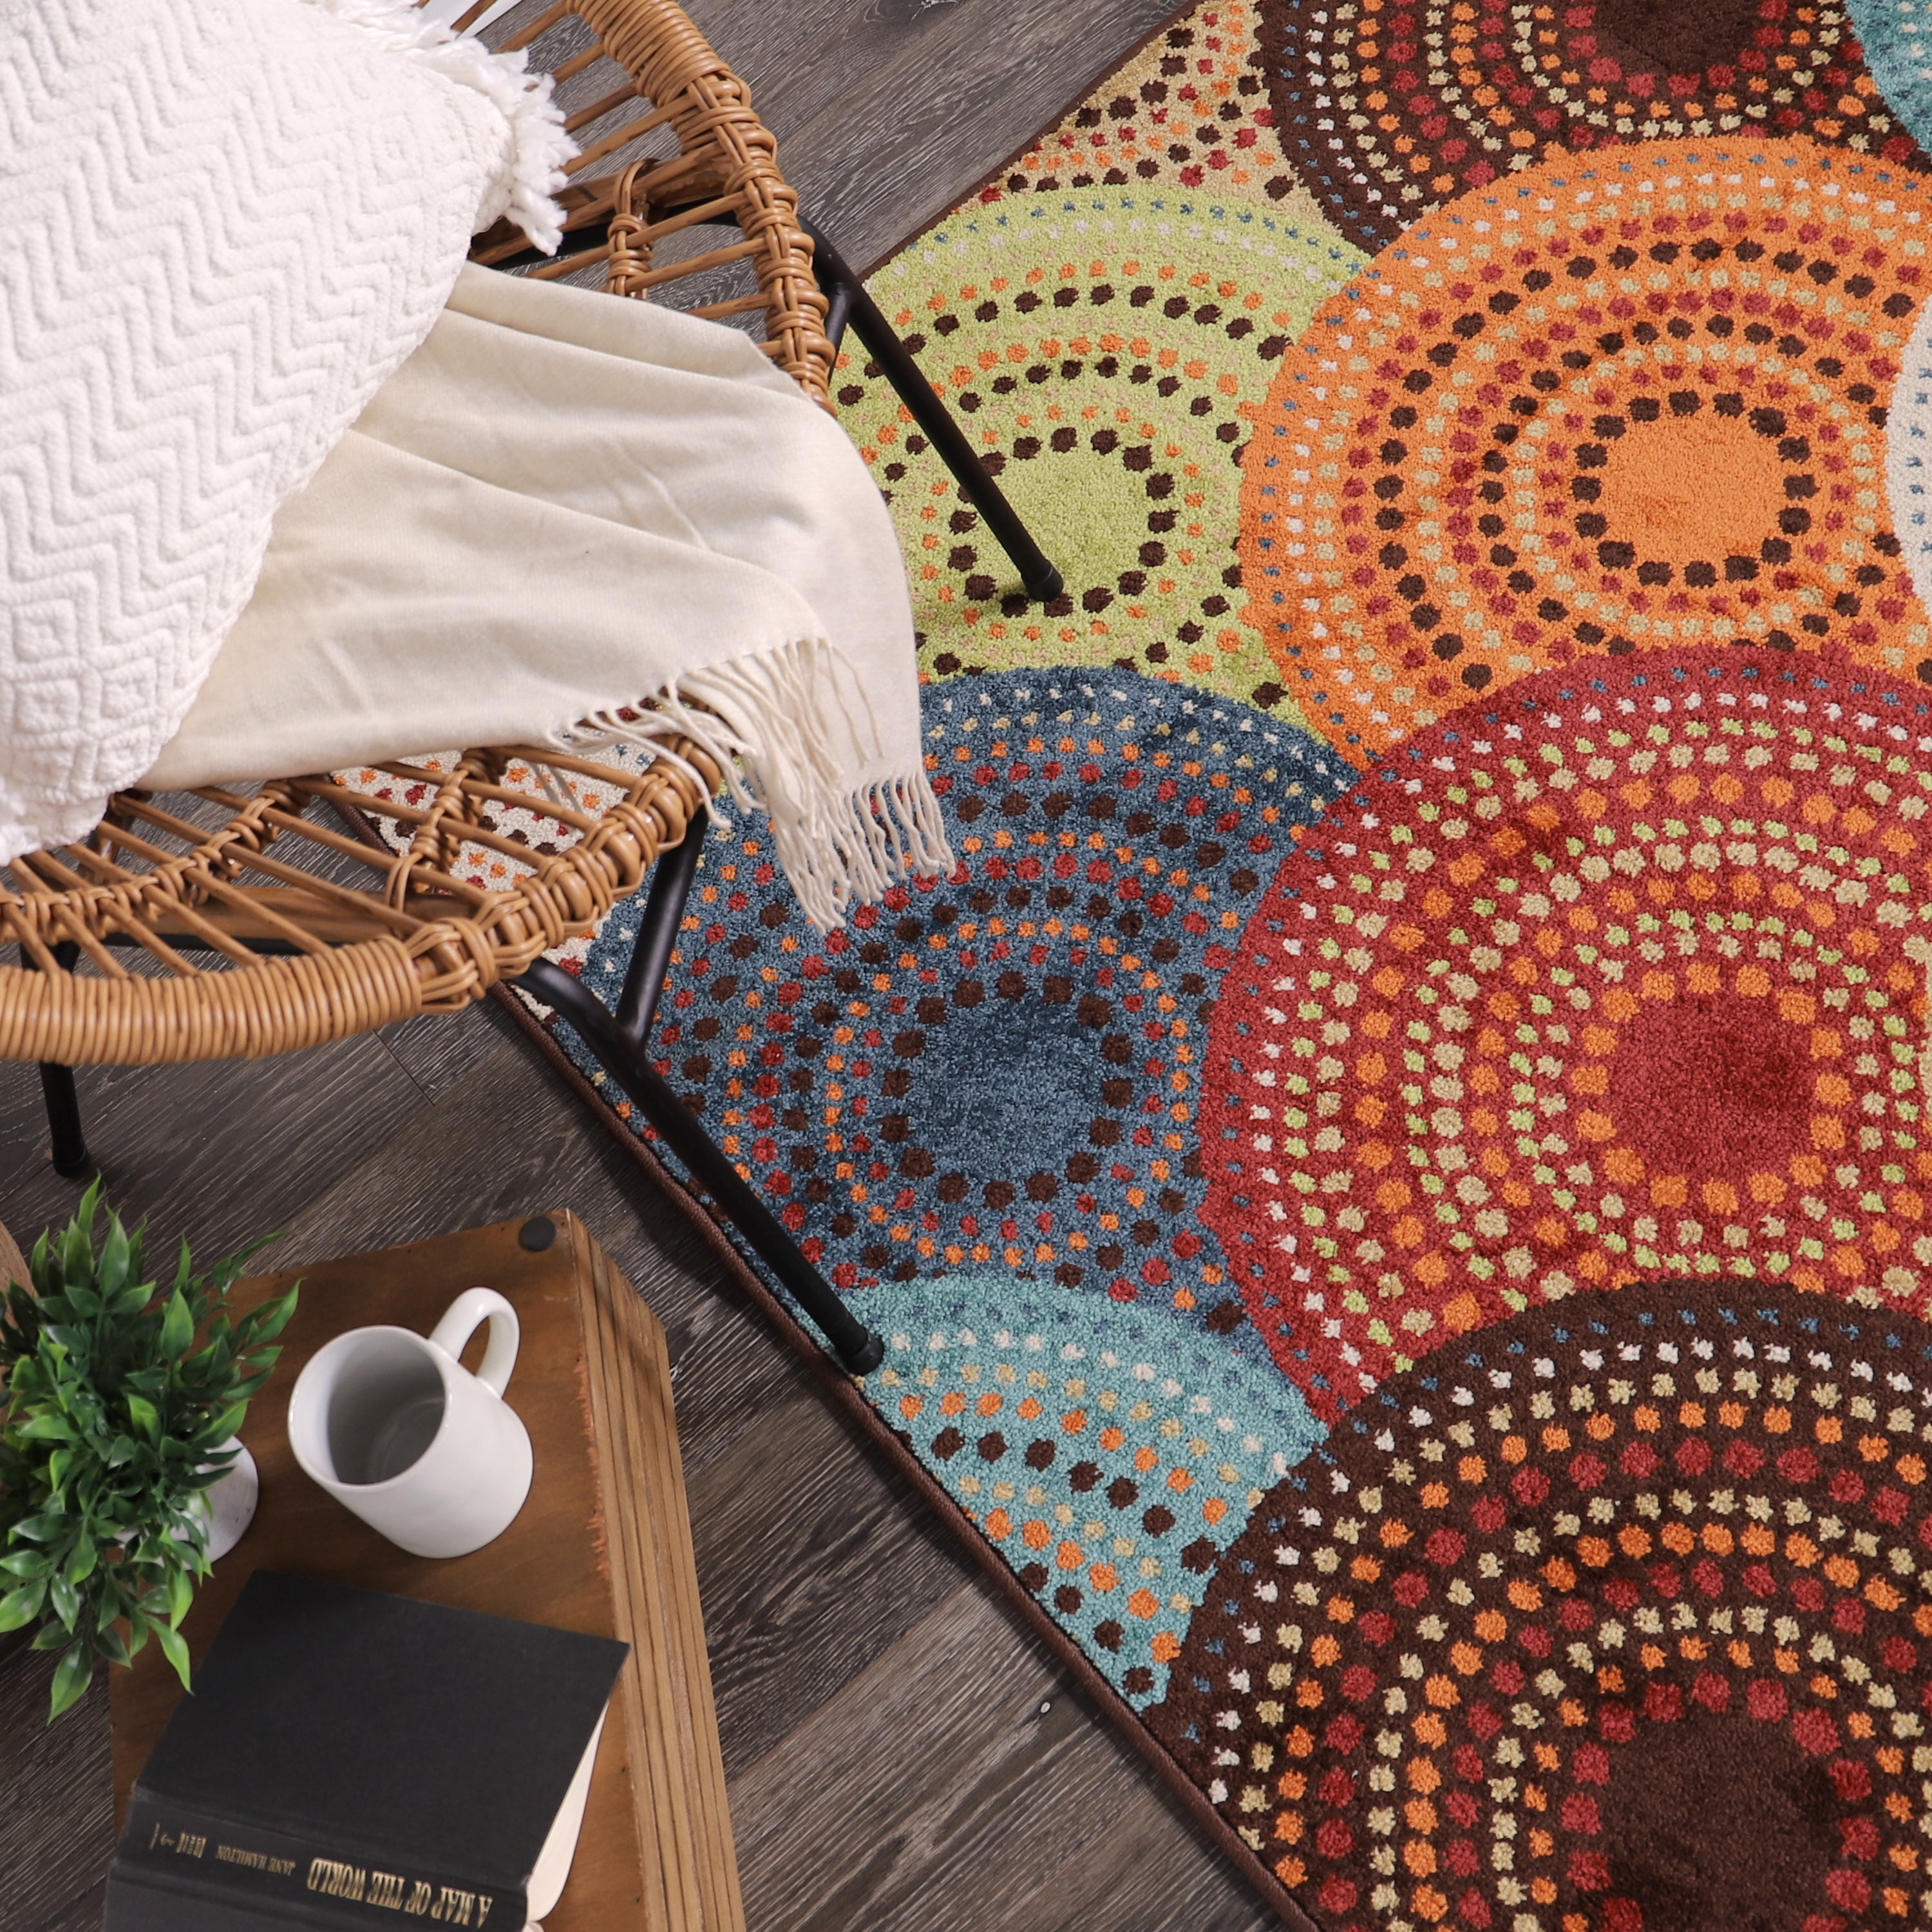 Gardens Bright Dotted Circles Area Rug